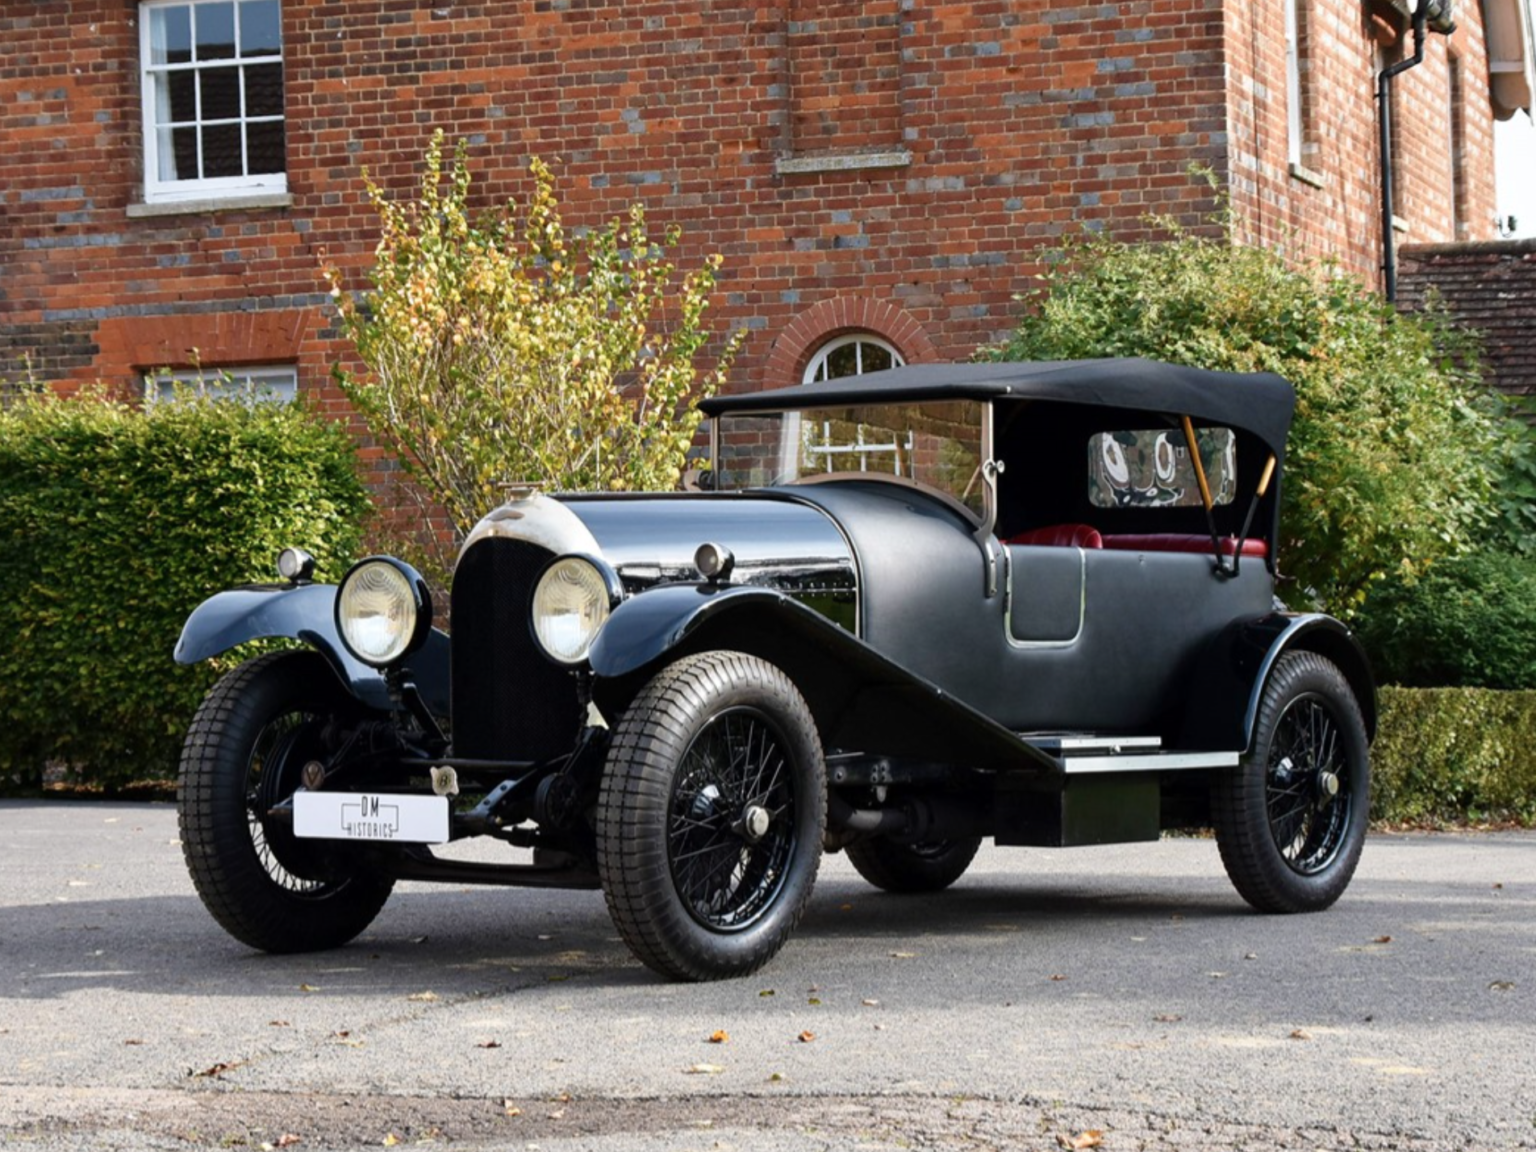 This 1924 Bentley 3 Litre was one of just 1,600 made.